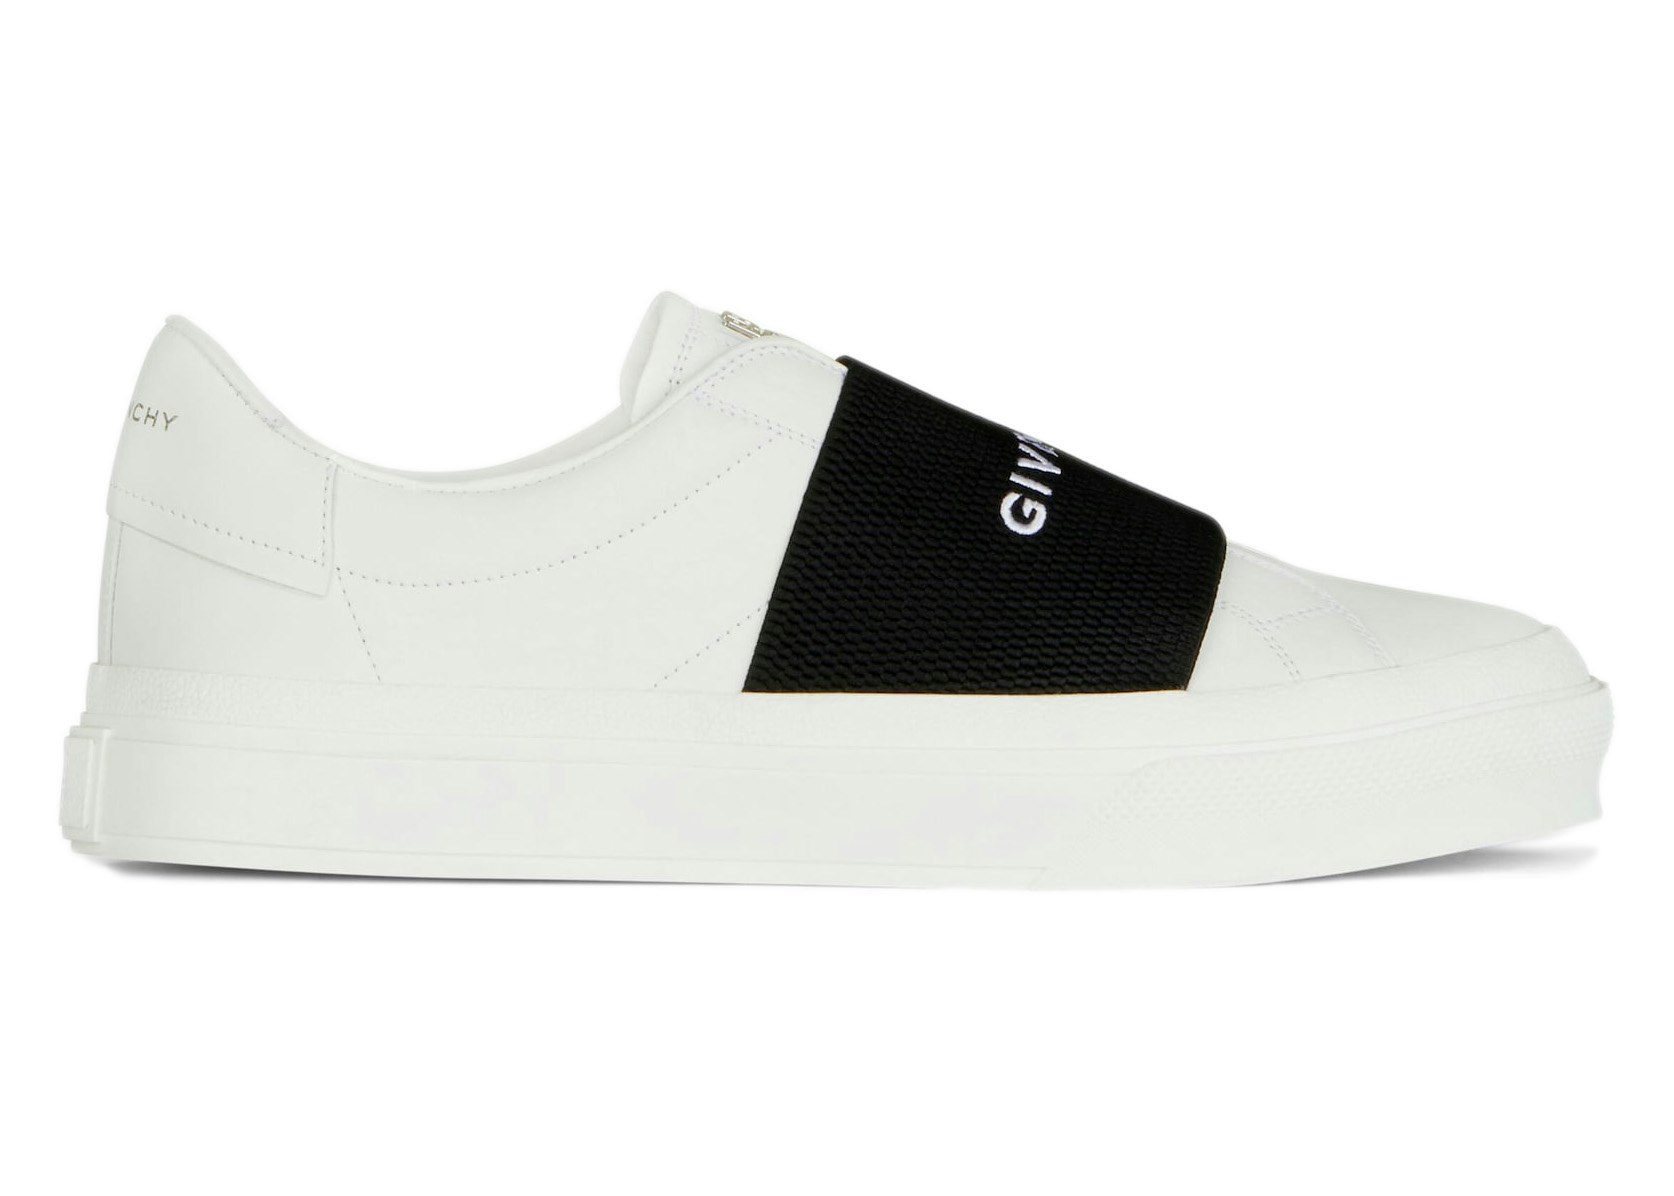 Givenchy Urban Knots Sneaker In Bianco | ModeSens | Leather slip ons, Givenchy  sneakers, Slip on sneakers